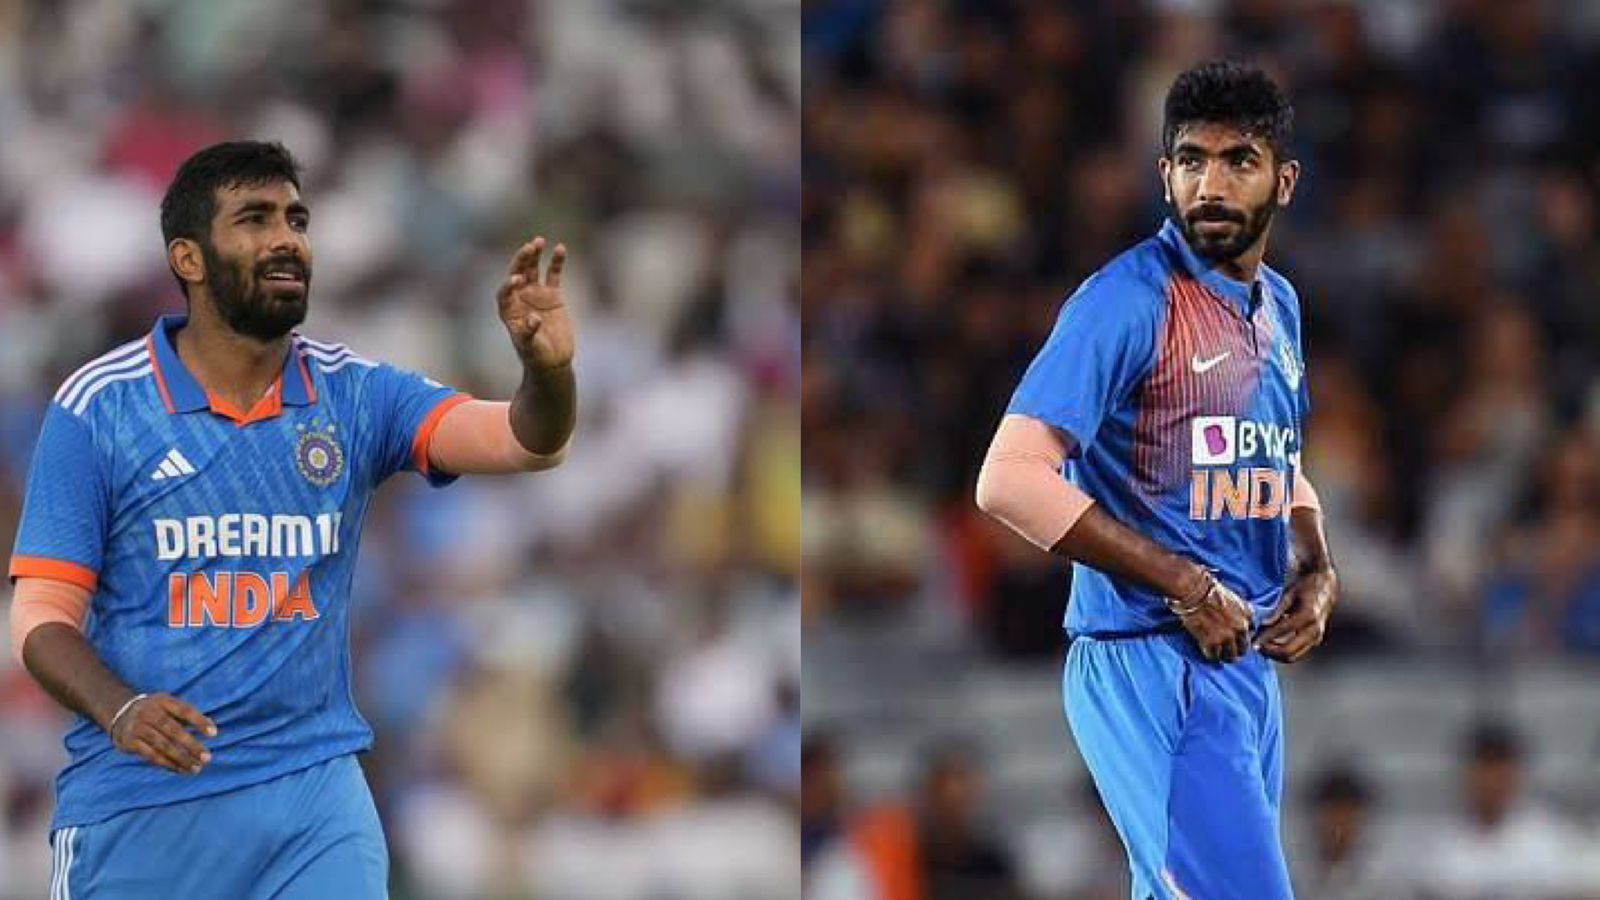 Jasprit Bumrah generally does not return with expensive figures